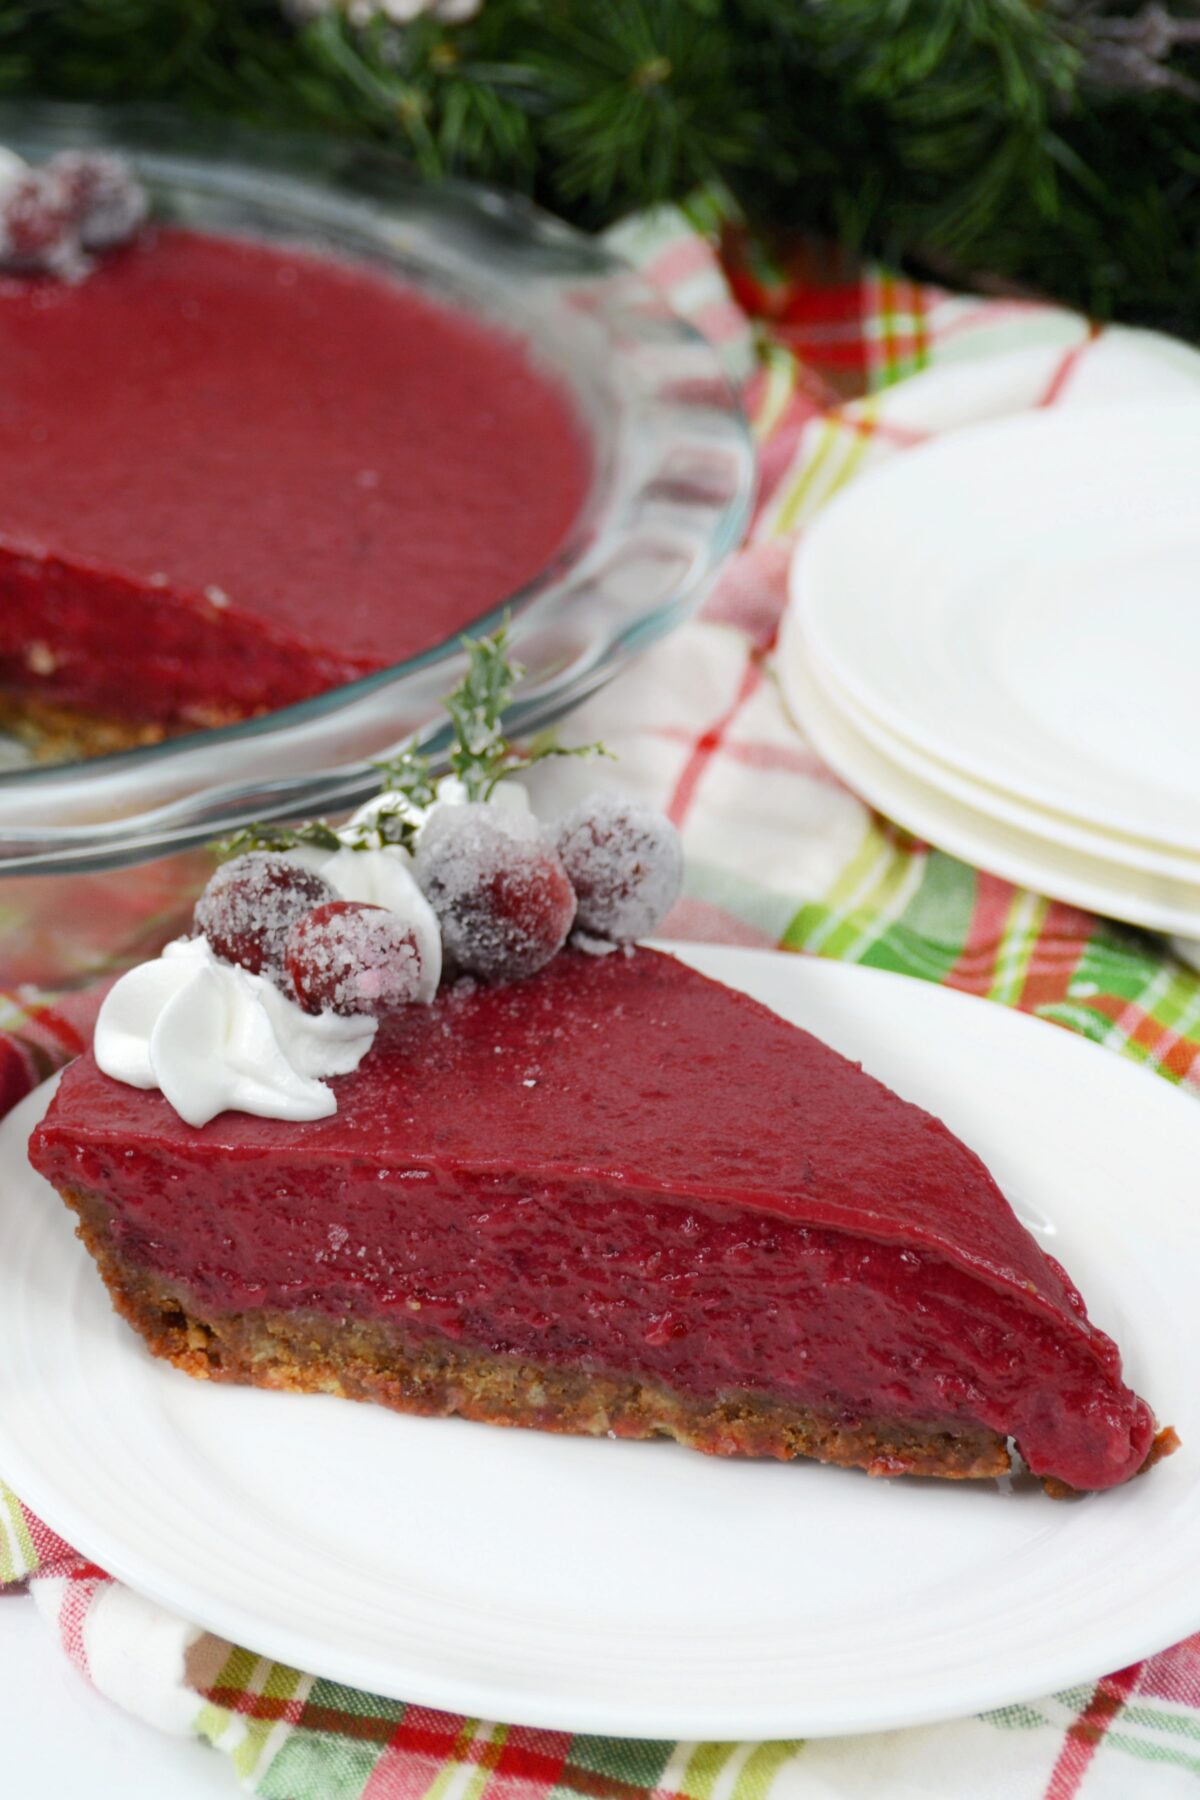 Looking for a last minute dish to bring to a Christmas party? Try this easy and delicious cranberry curd tart recipe. It's sure to be a hit!